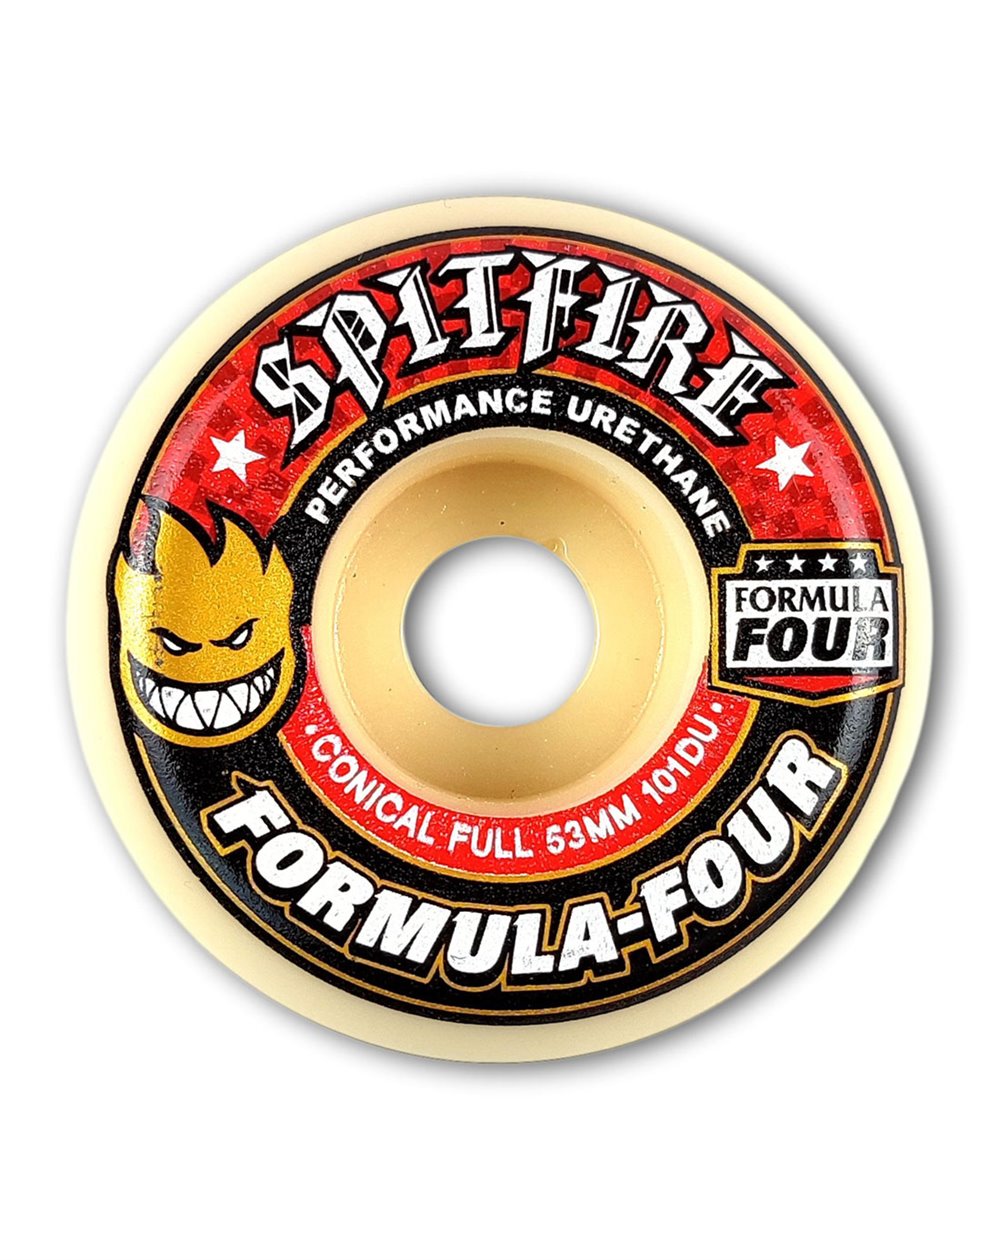 Spitfire Formula Four Conical Full 53mm 101A Skateboard Wheels pack of 4